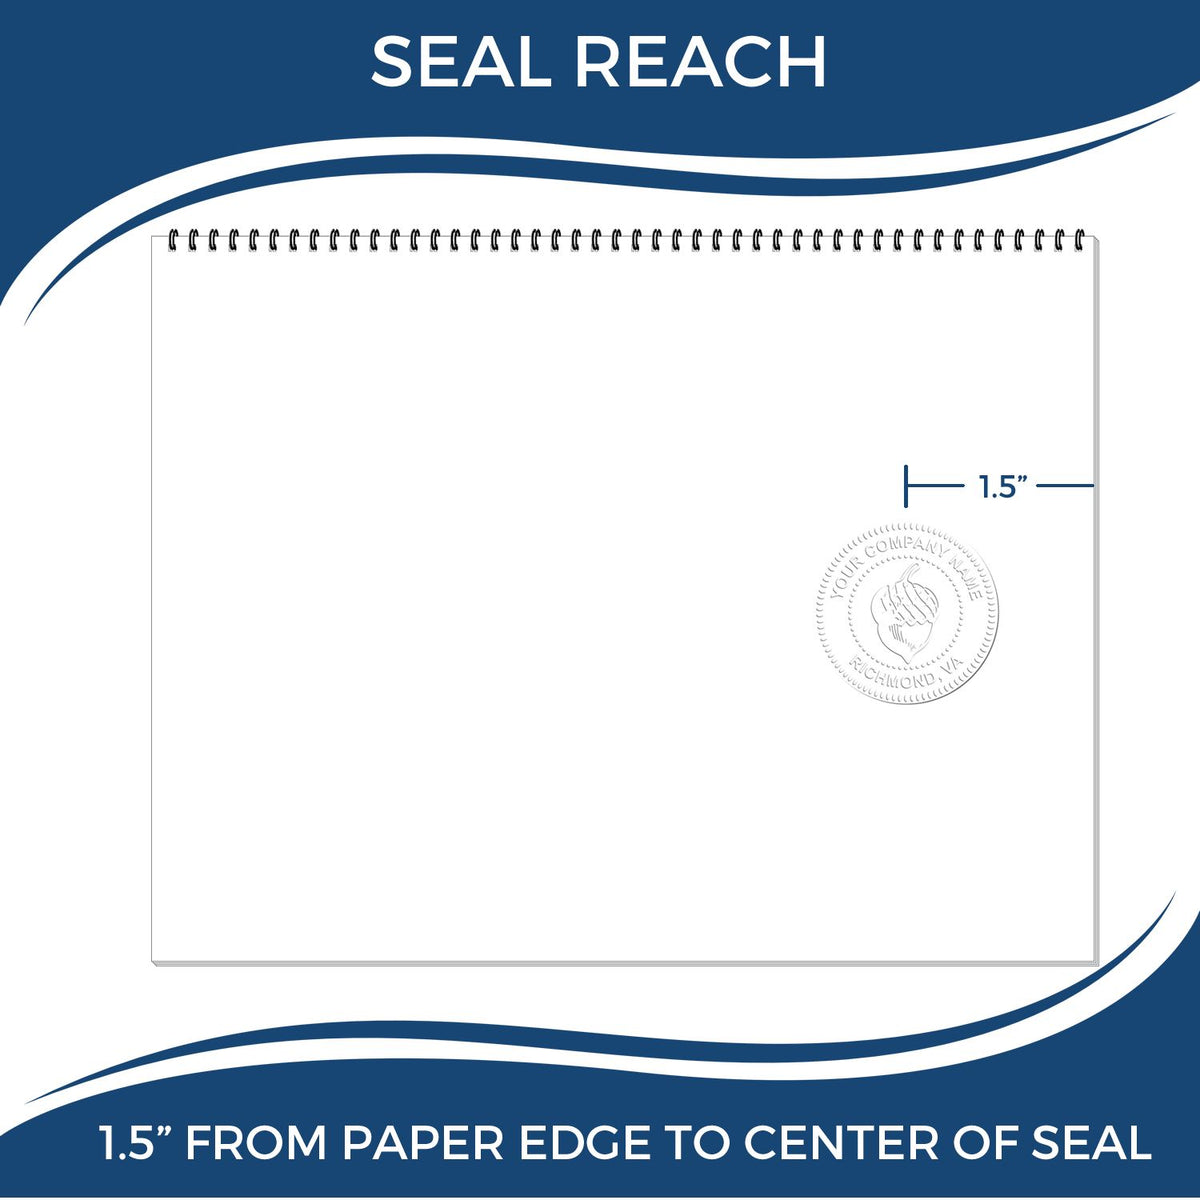 An infographic showing the seal reach which is represented by a ruler and a miniature seal image of the Florida Geologist Desk Seal